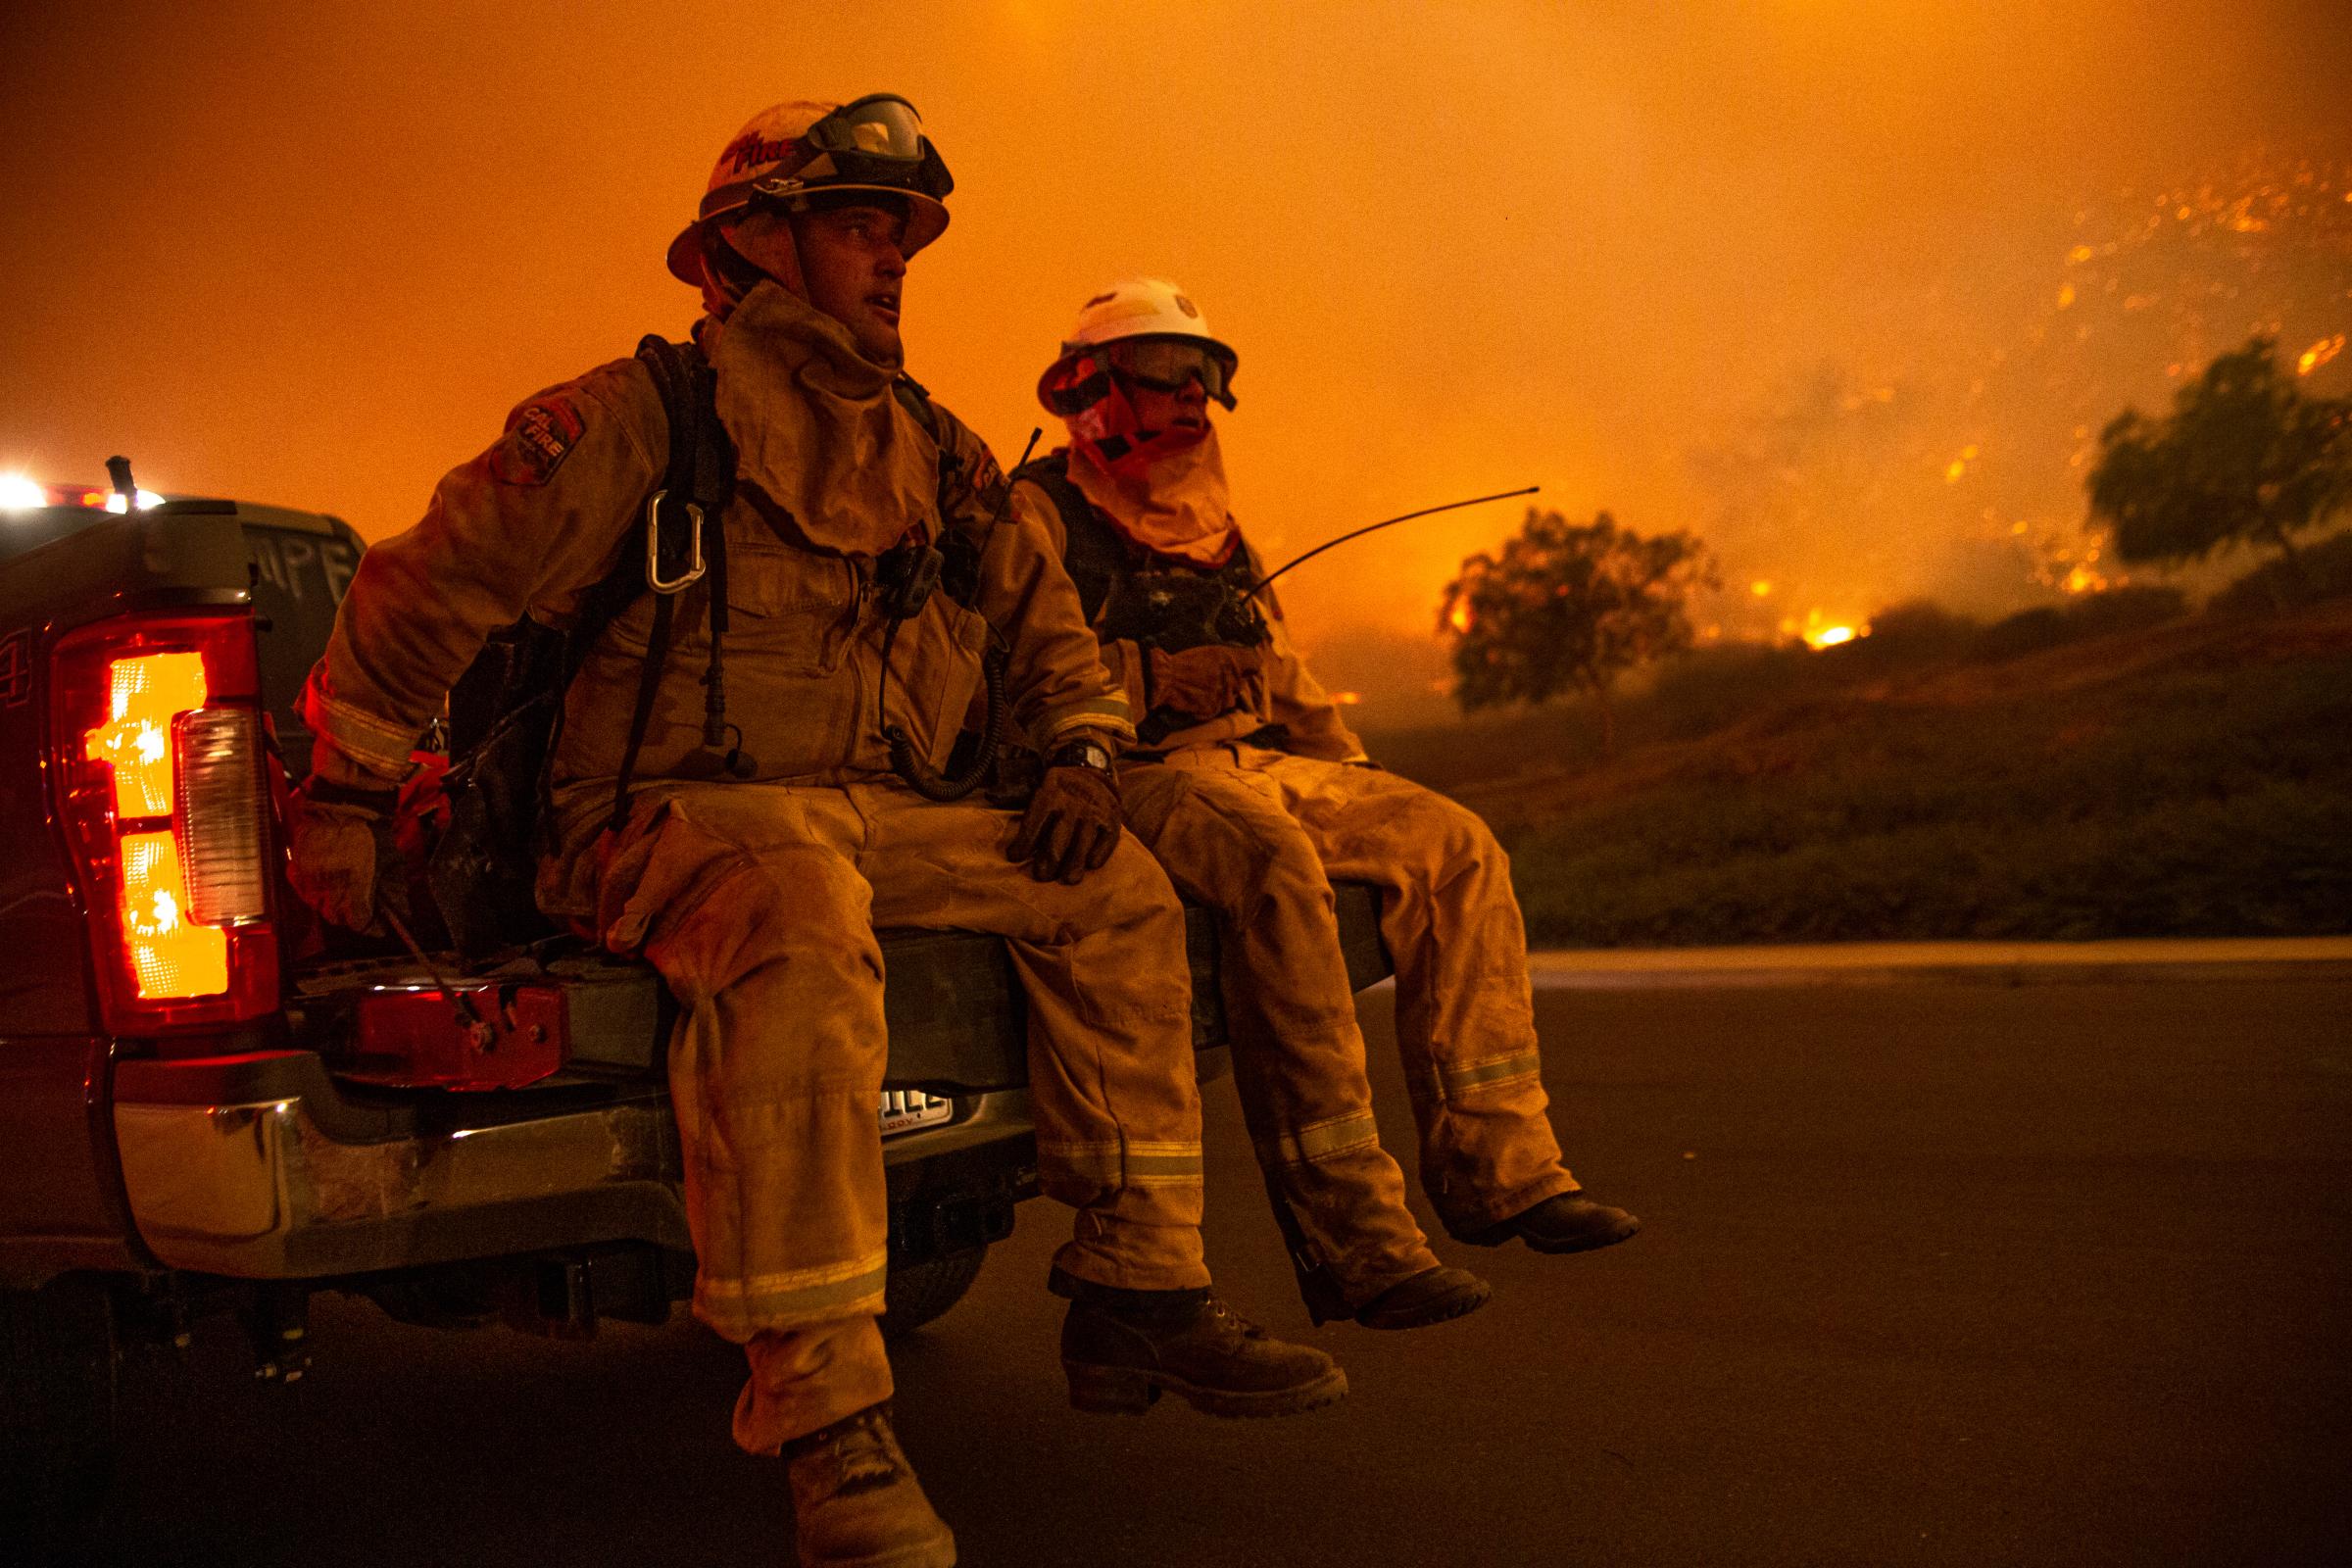 NEWS - The state of California faced its worst fire season in...